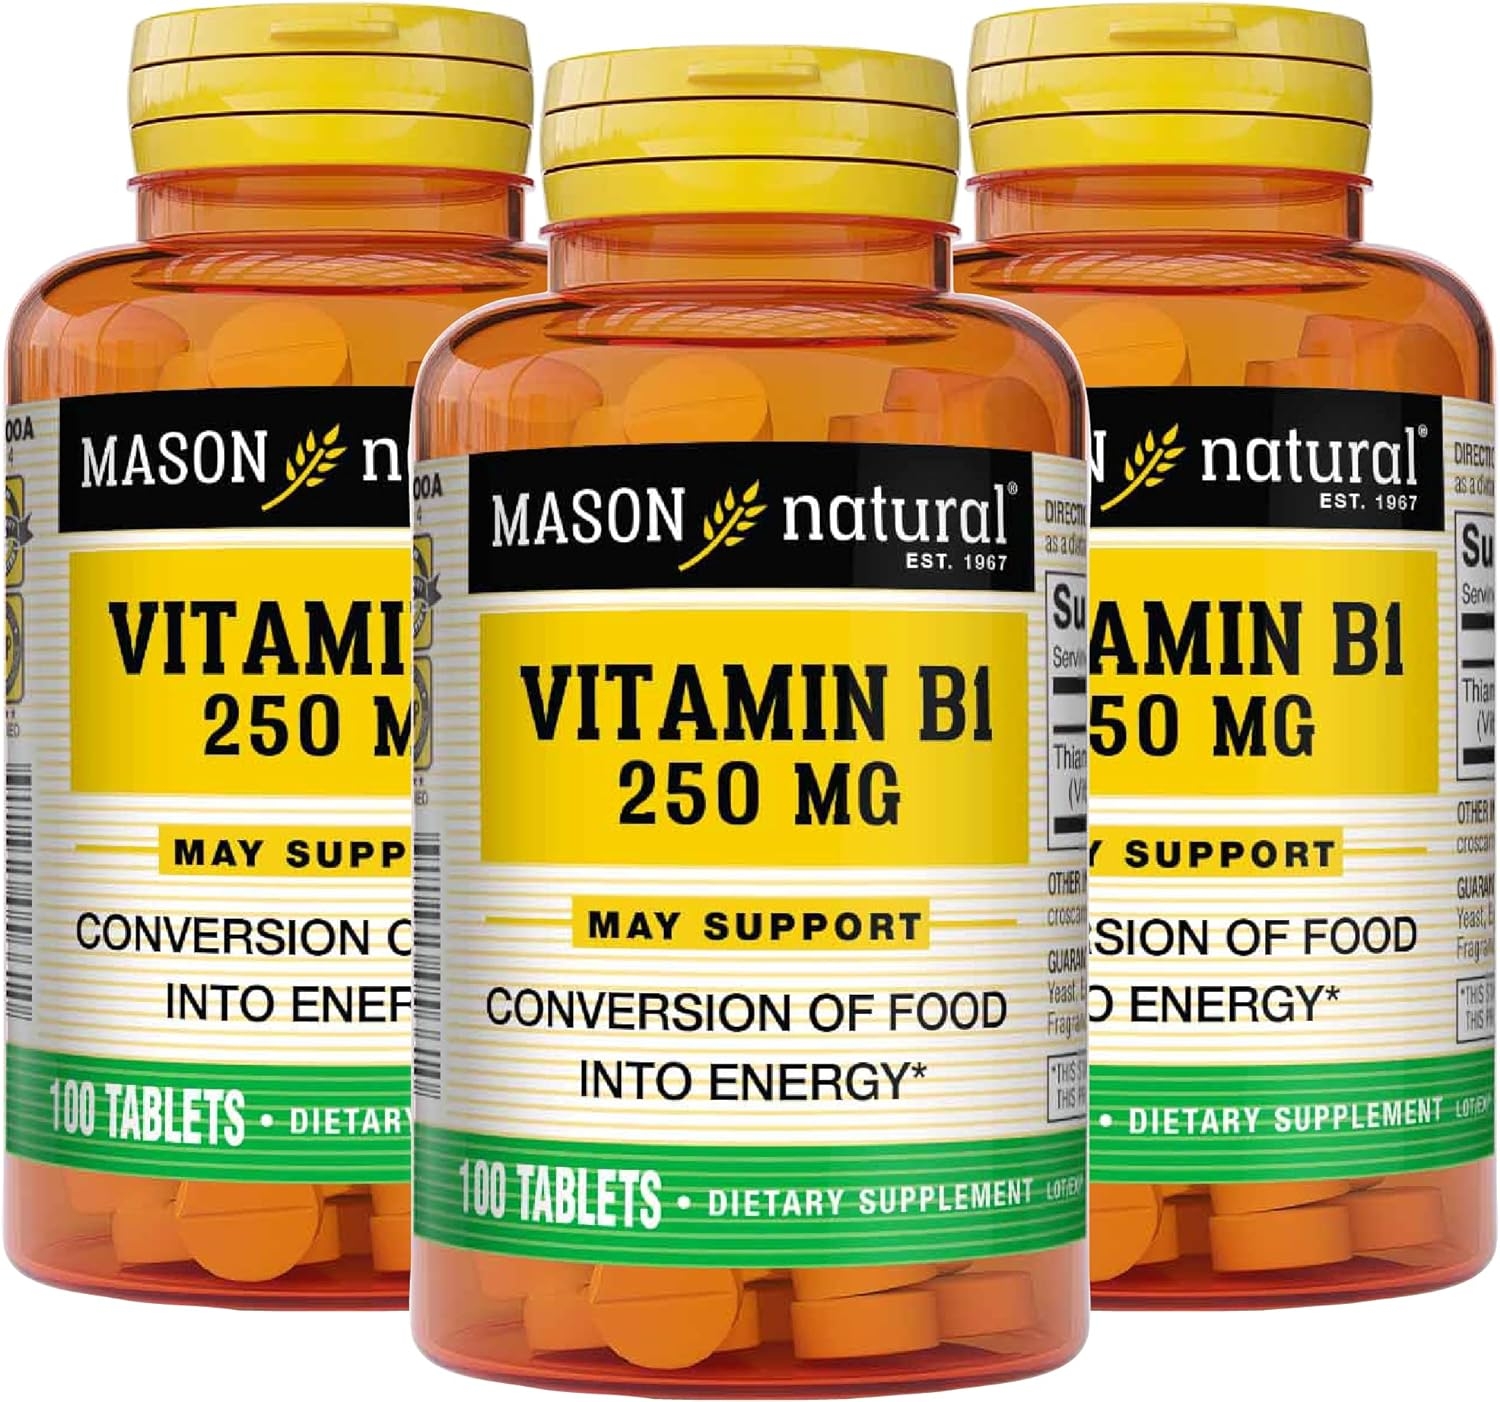 Mason Natural Vitamin B1 (Thiamin) 250 mg - Healthy Conversion of Food into Energy, Supports Nerve and Immune Health, 100 Tablets (Pack of 3)